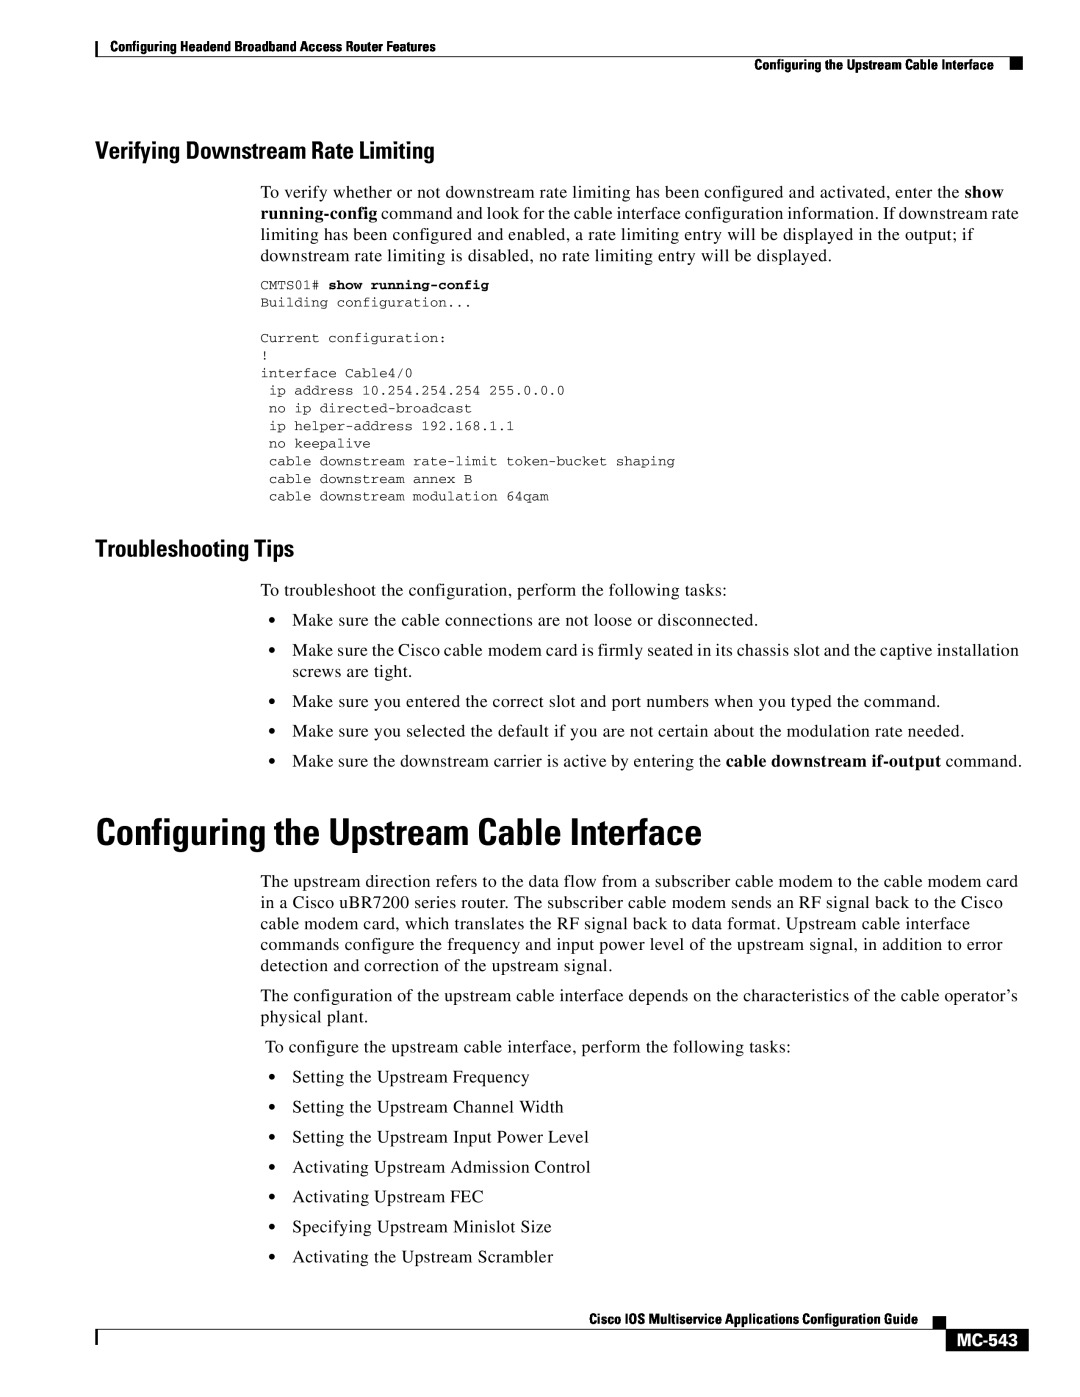 Cisco Systems uBR7200 manual Configuring the Upstream Cable Interface, Verifying Downstream Rate Limiting, MC-543 